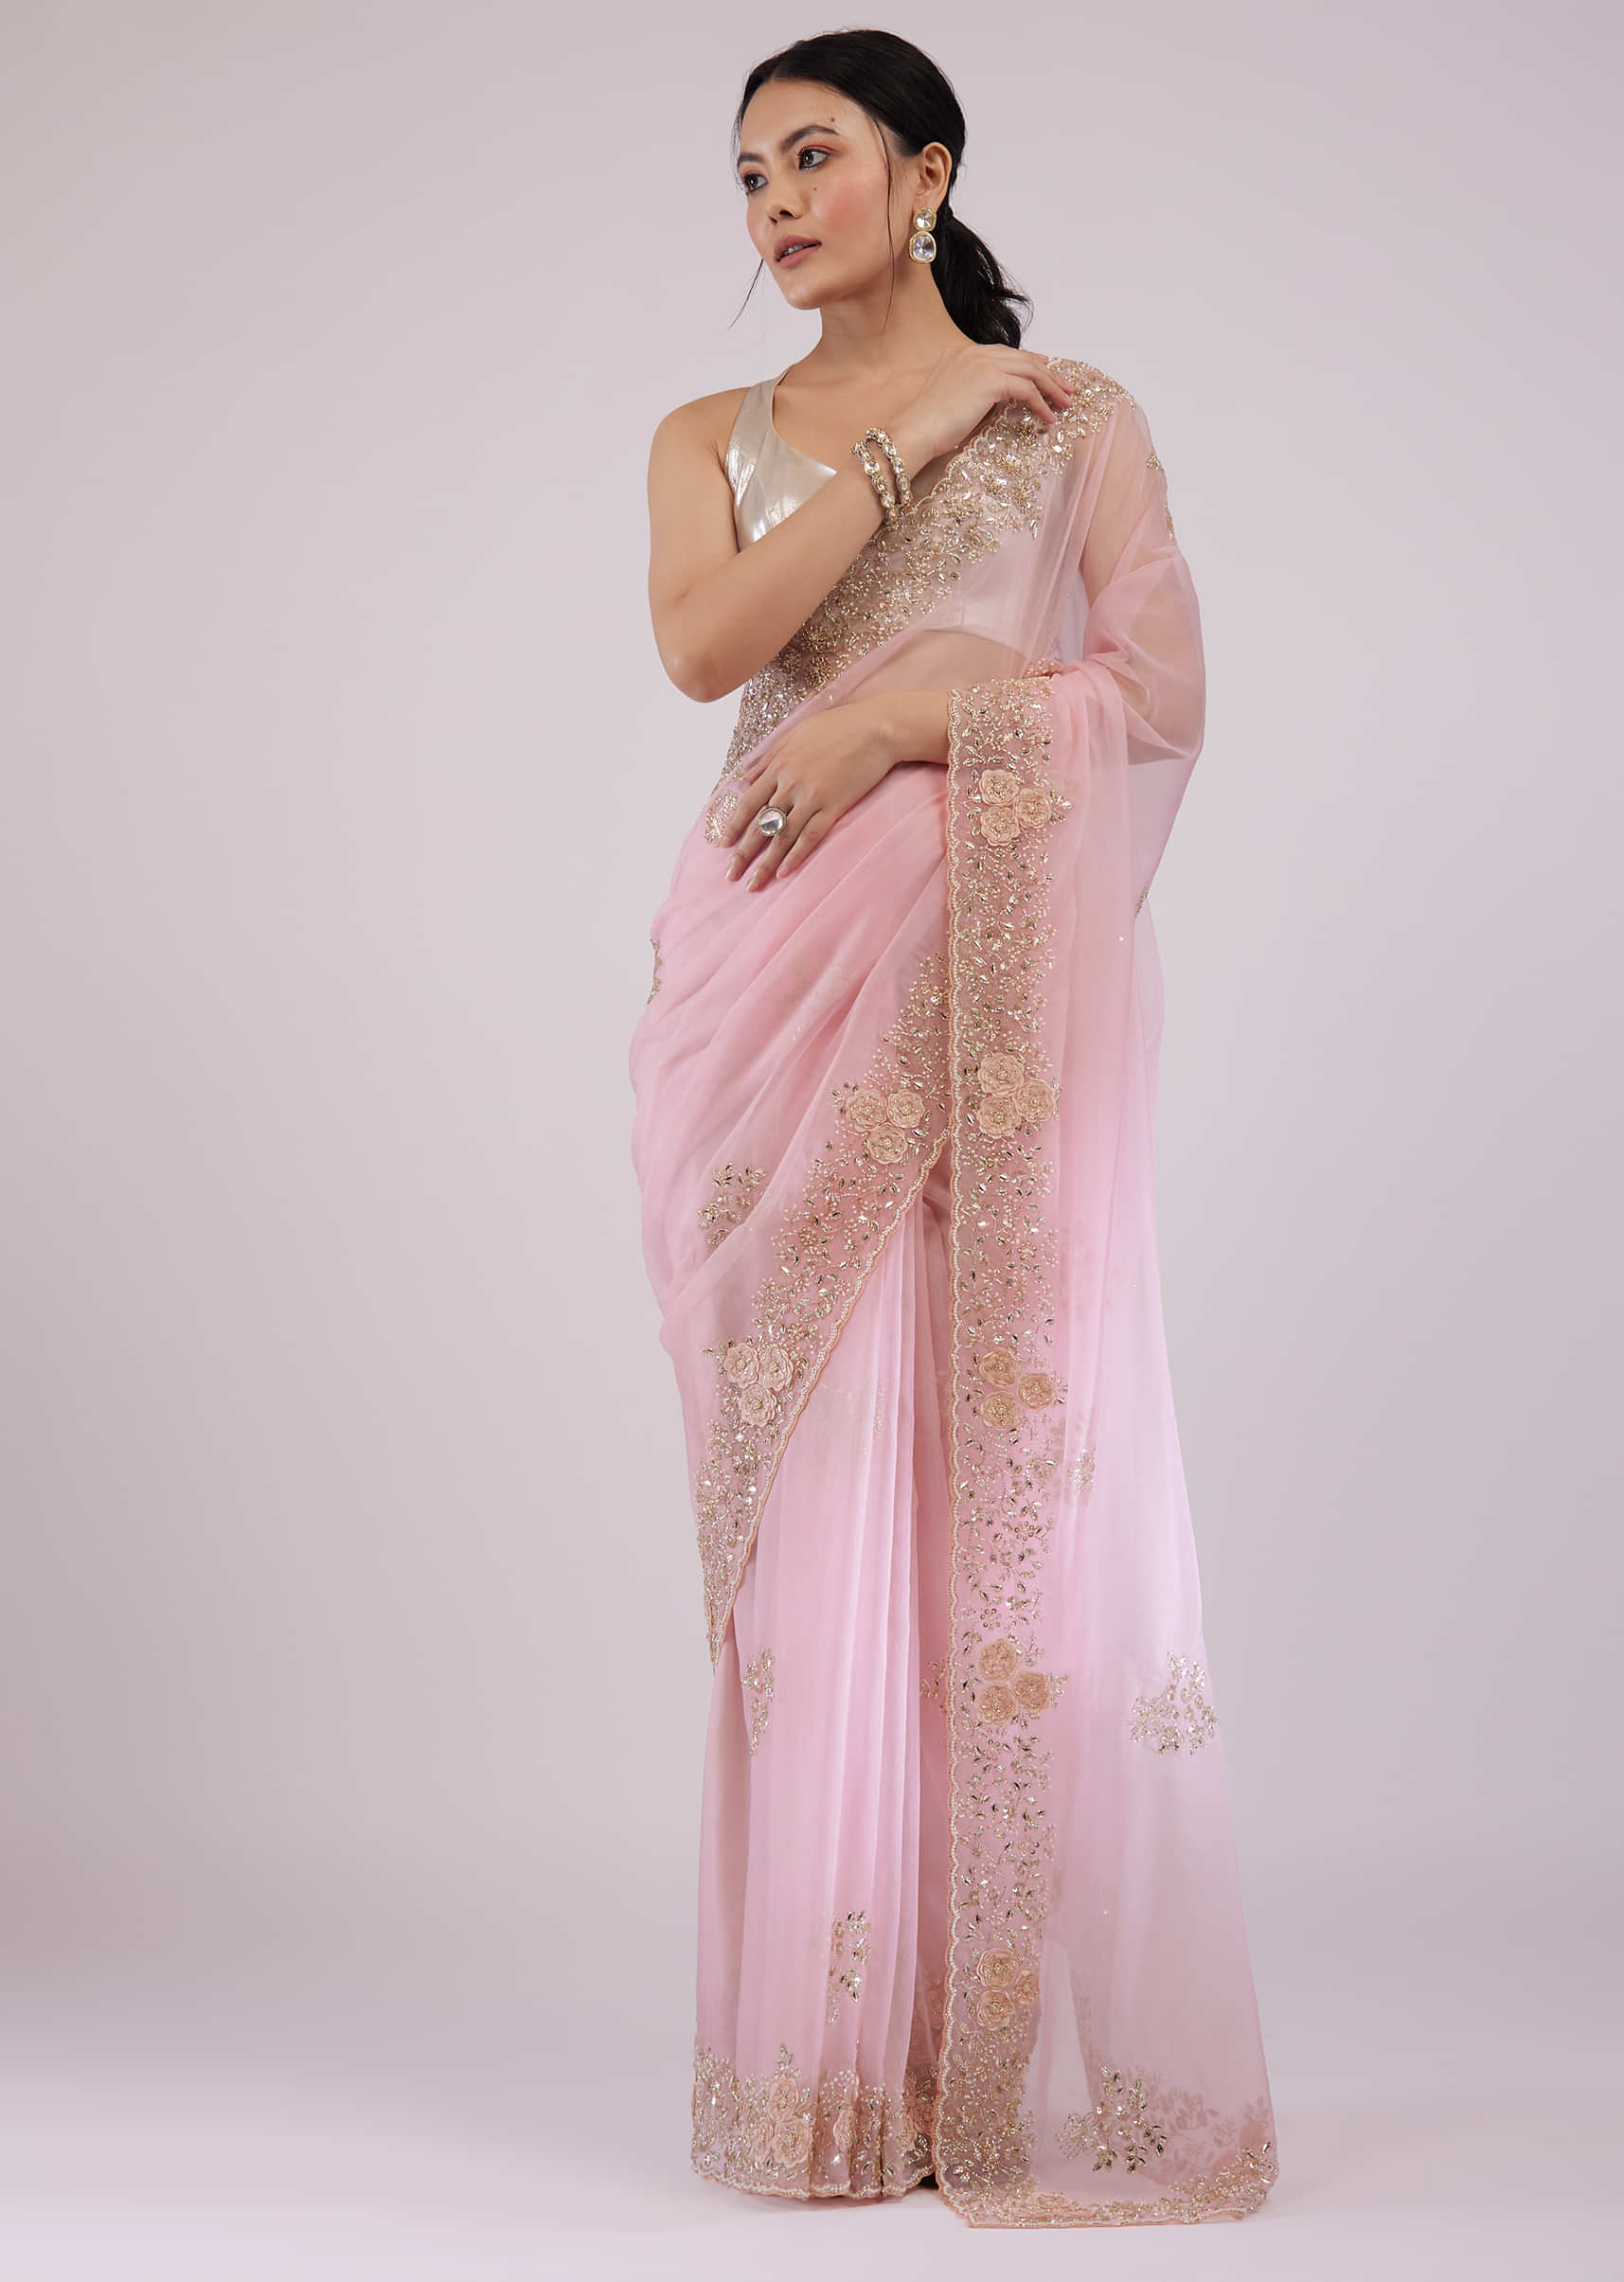 Candy Pink Organza Saree With Intricate Embroidery